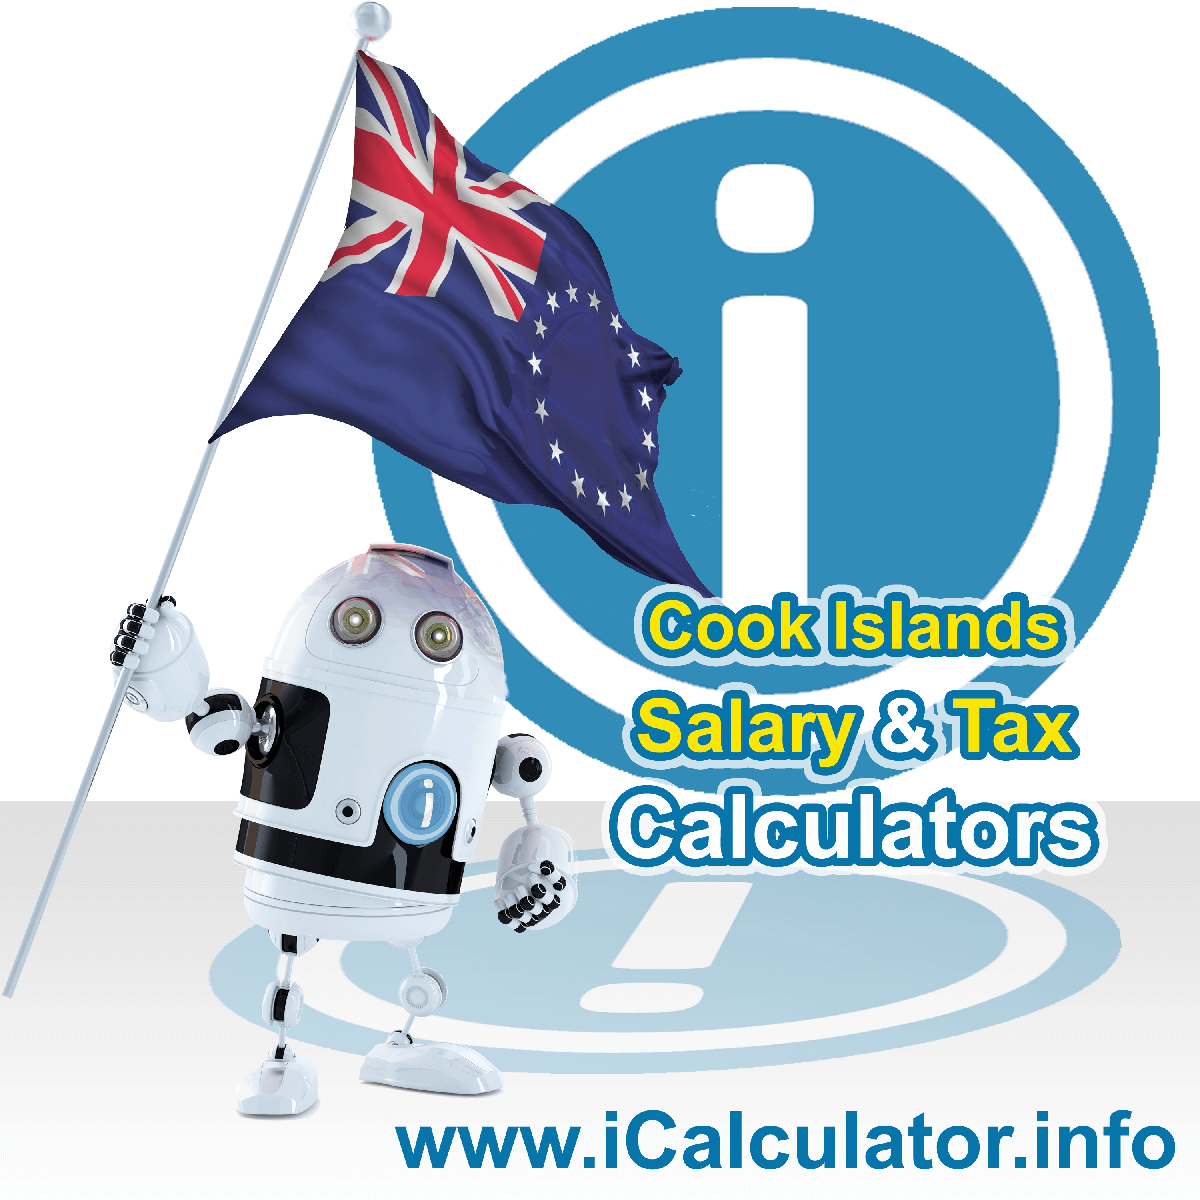 Cook Islands Tax Calculator. This image shows the Cook Islands flag and information relating to the tax formula for the Cook Islands Salary Calculator